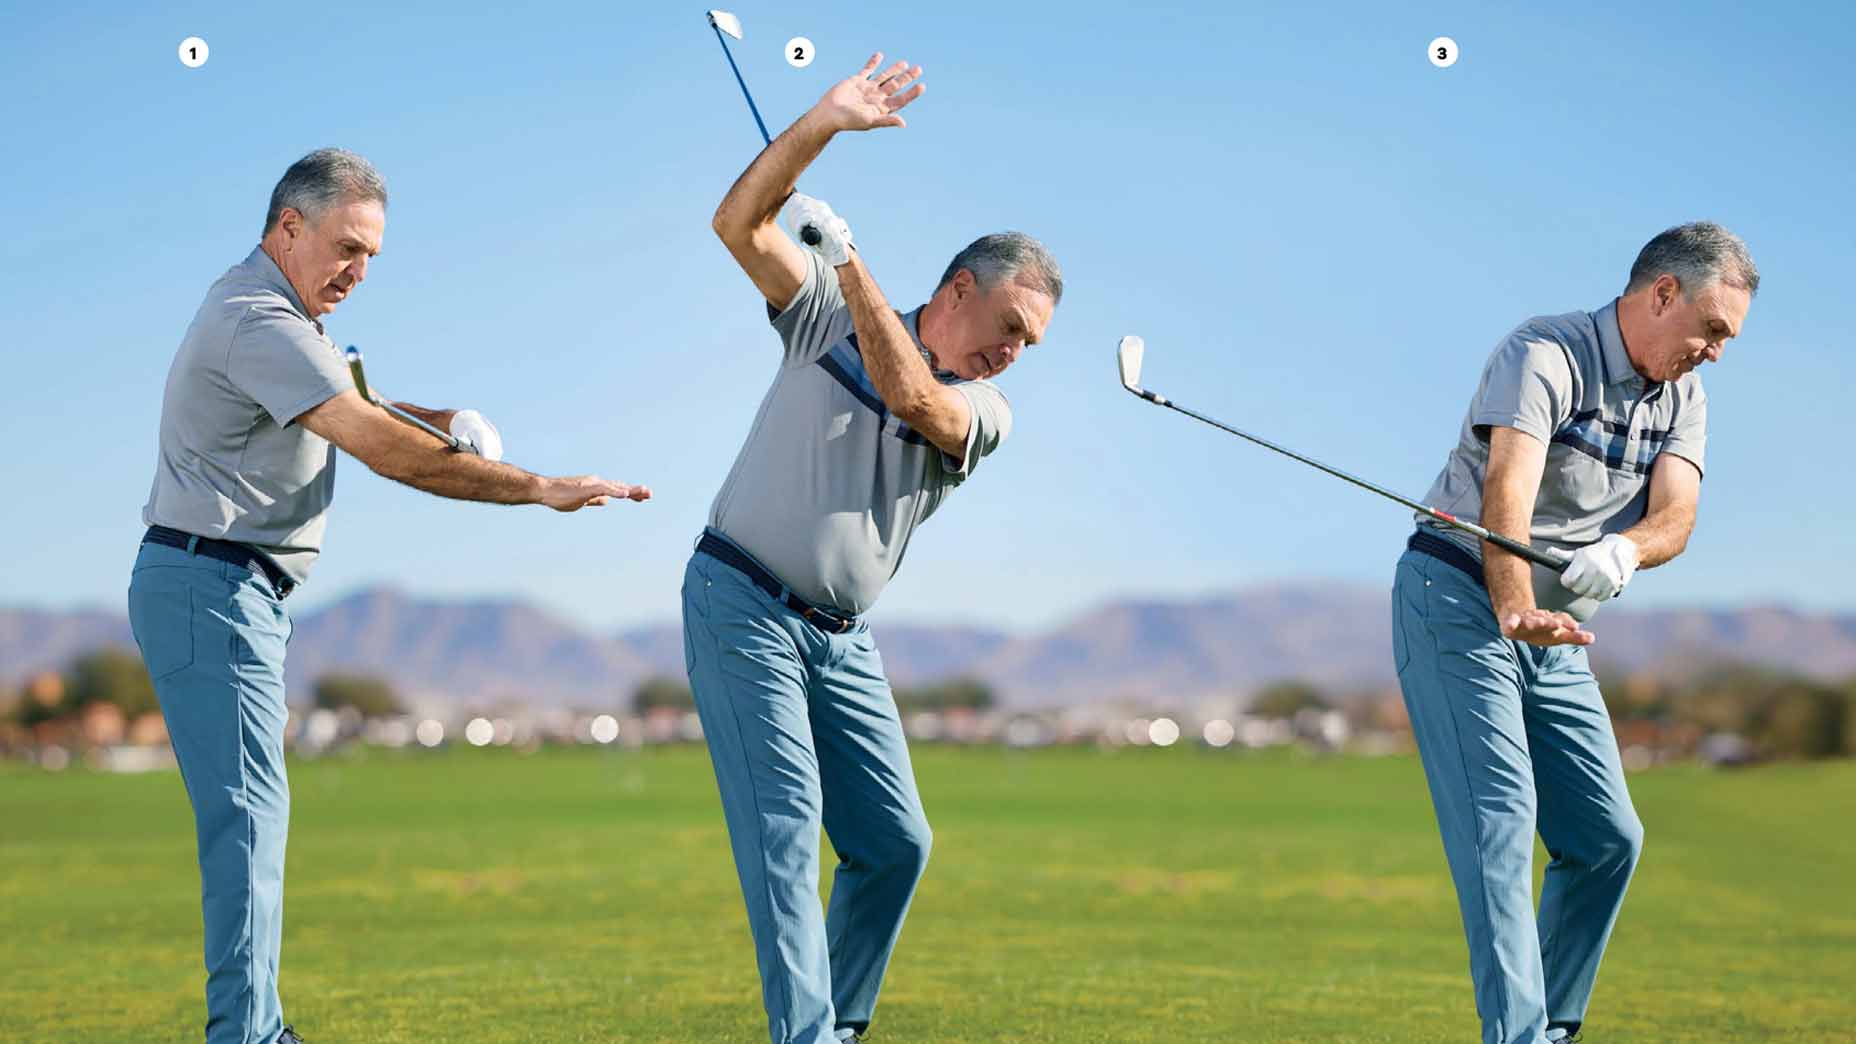 brian manzella demonstrates how to properly raise and lower your arms during the swing